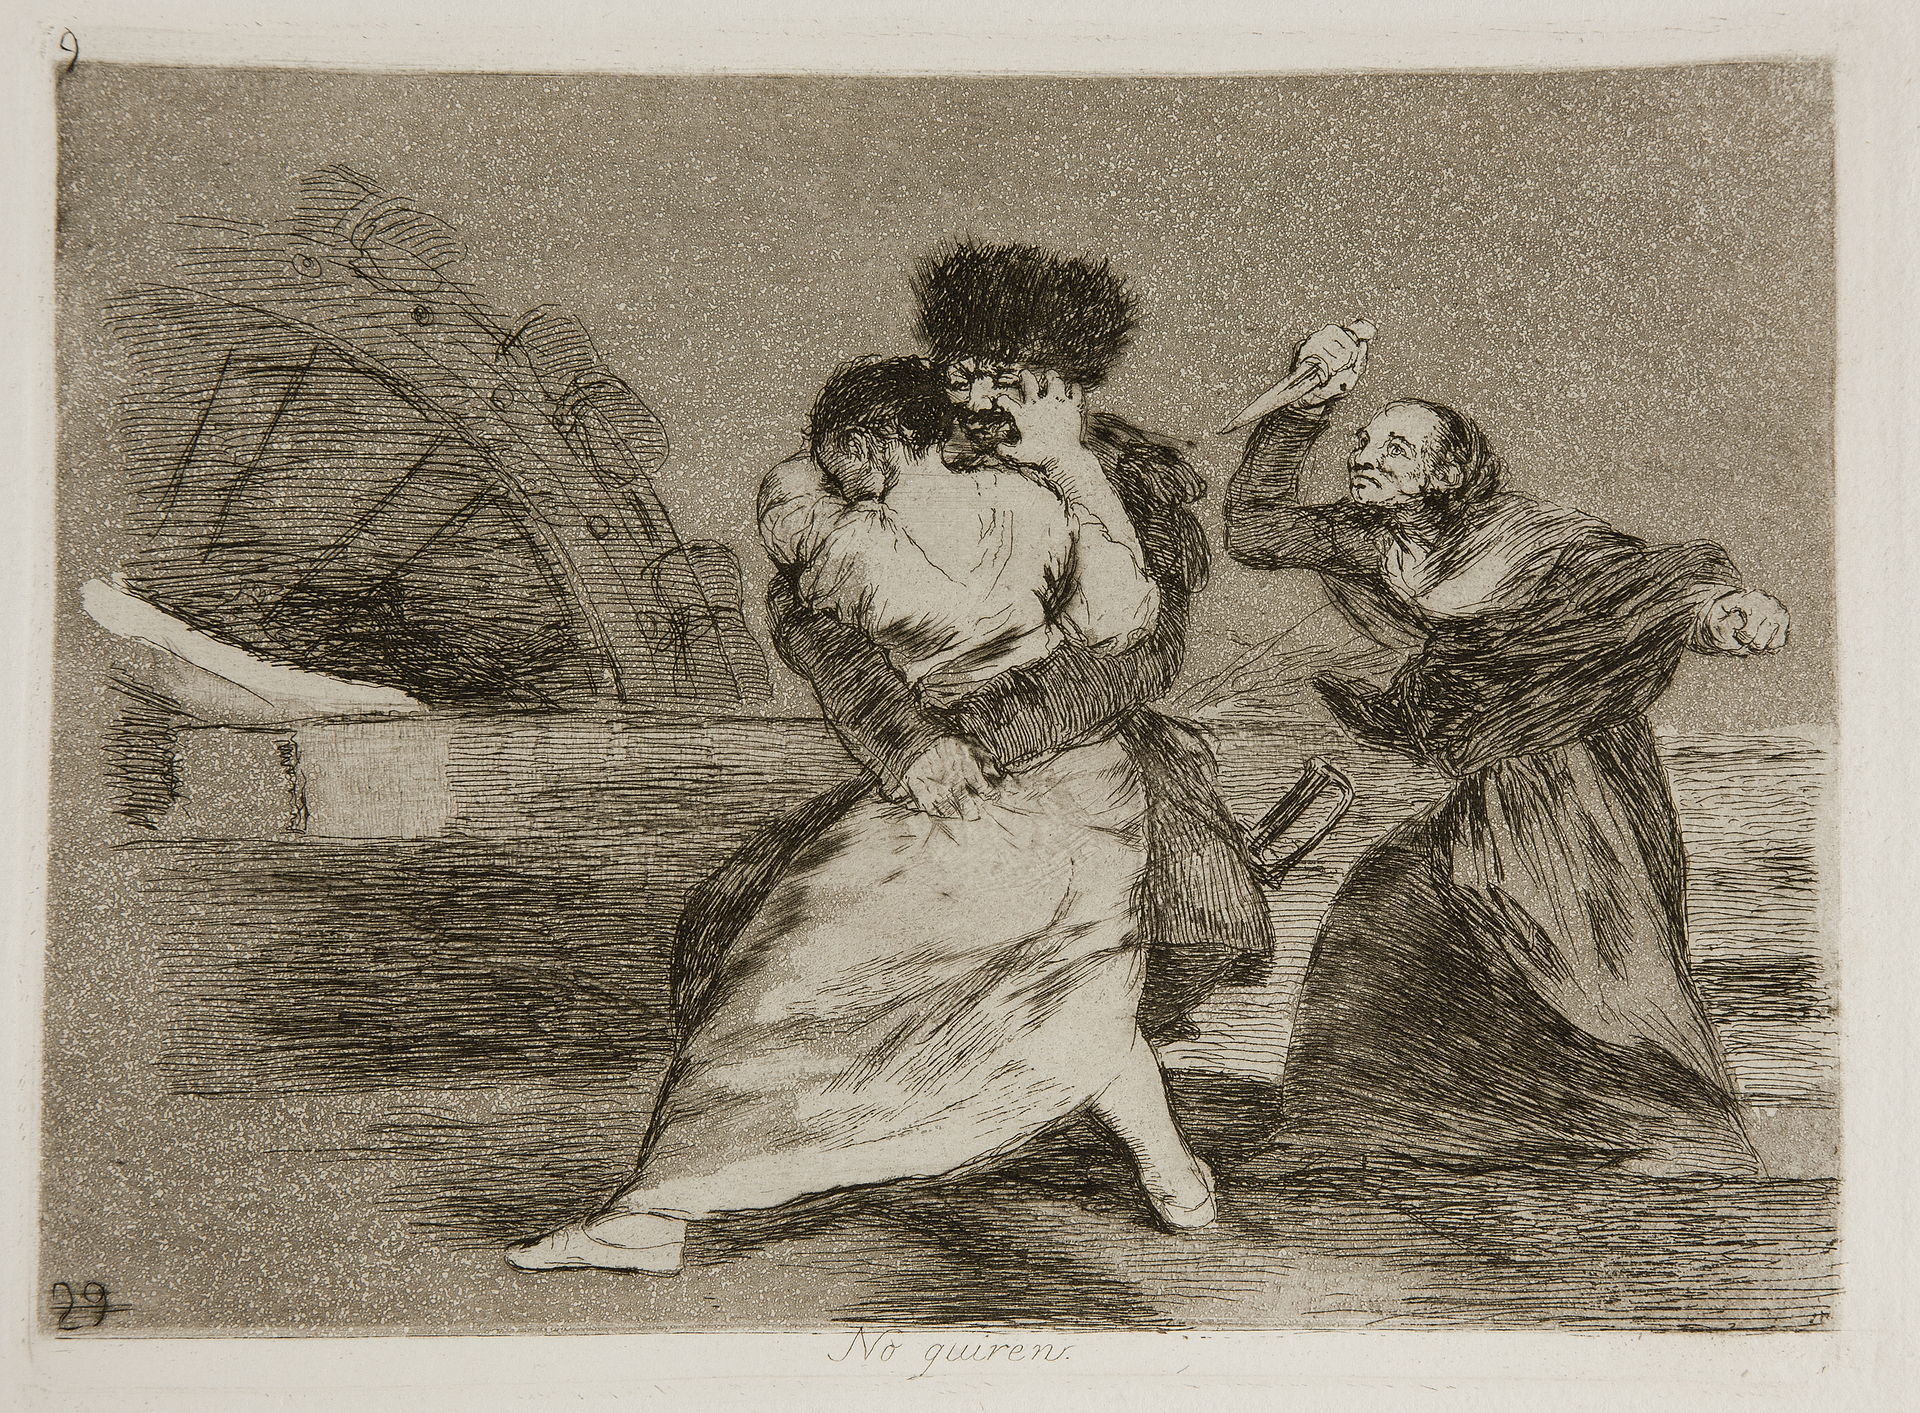 Goya Prints from the 19th Century Look Like Something From Today's News